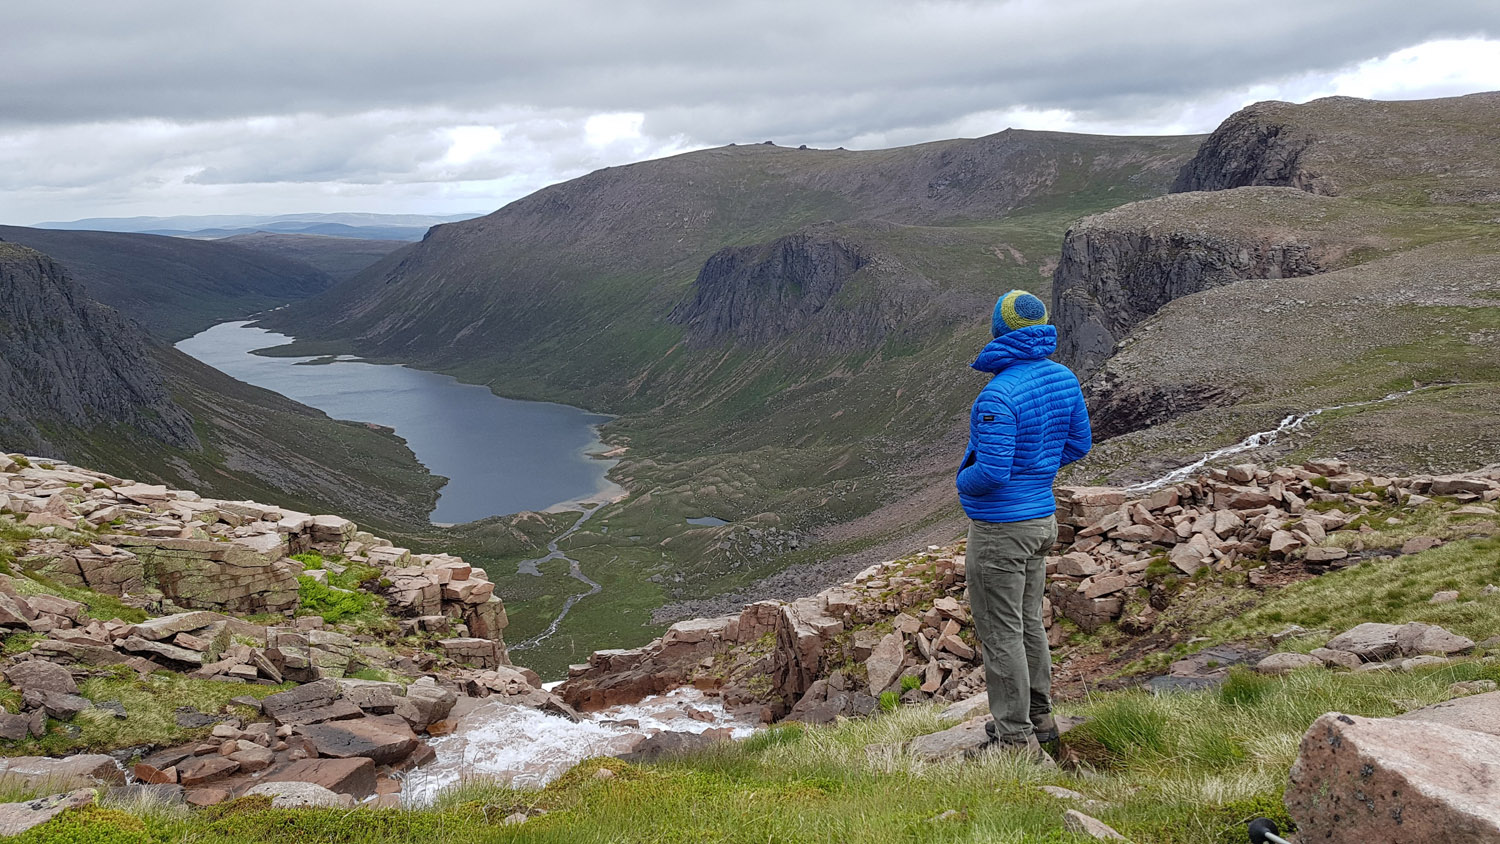 July-first hill trip after shutdown rules are relaxed- Cairngorms Loch Avon